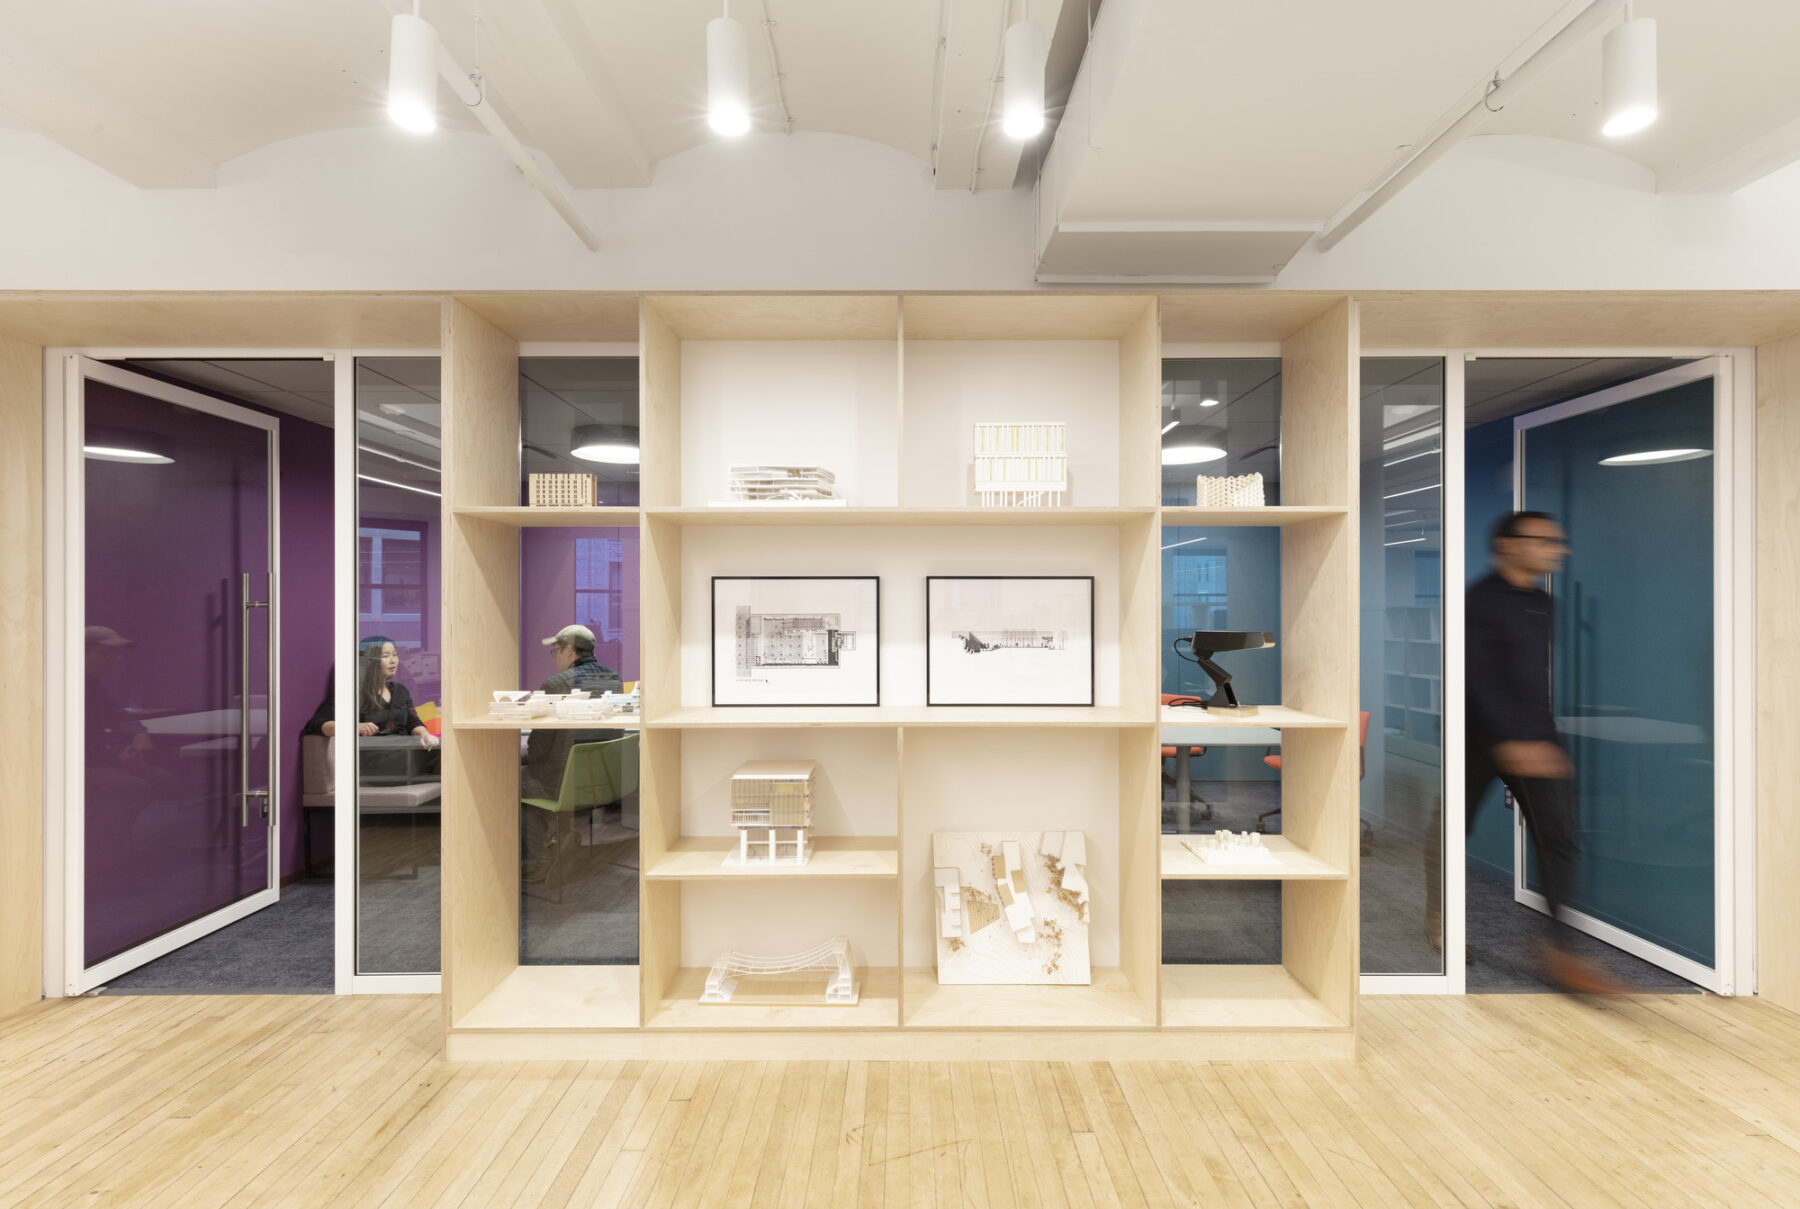 gallery display shelves with architectural models with doors on either side into small, colorful meeting rooms